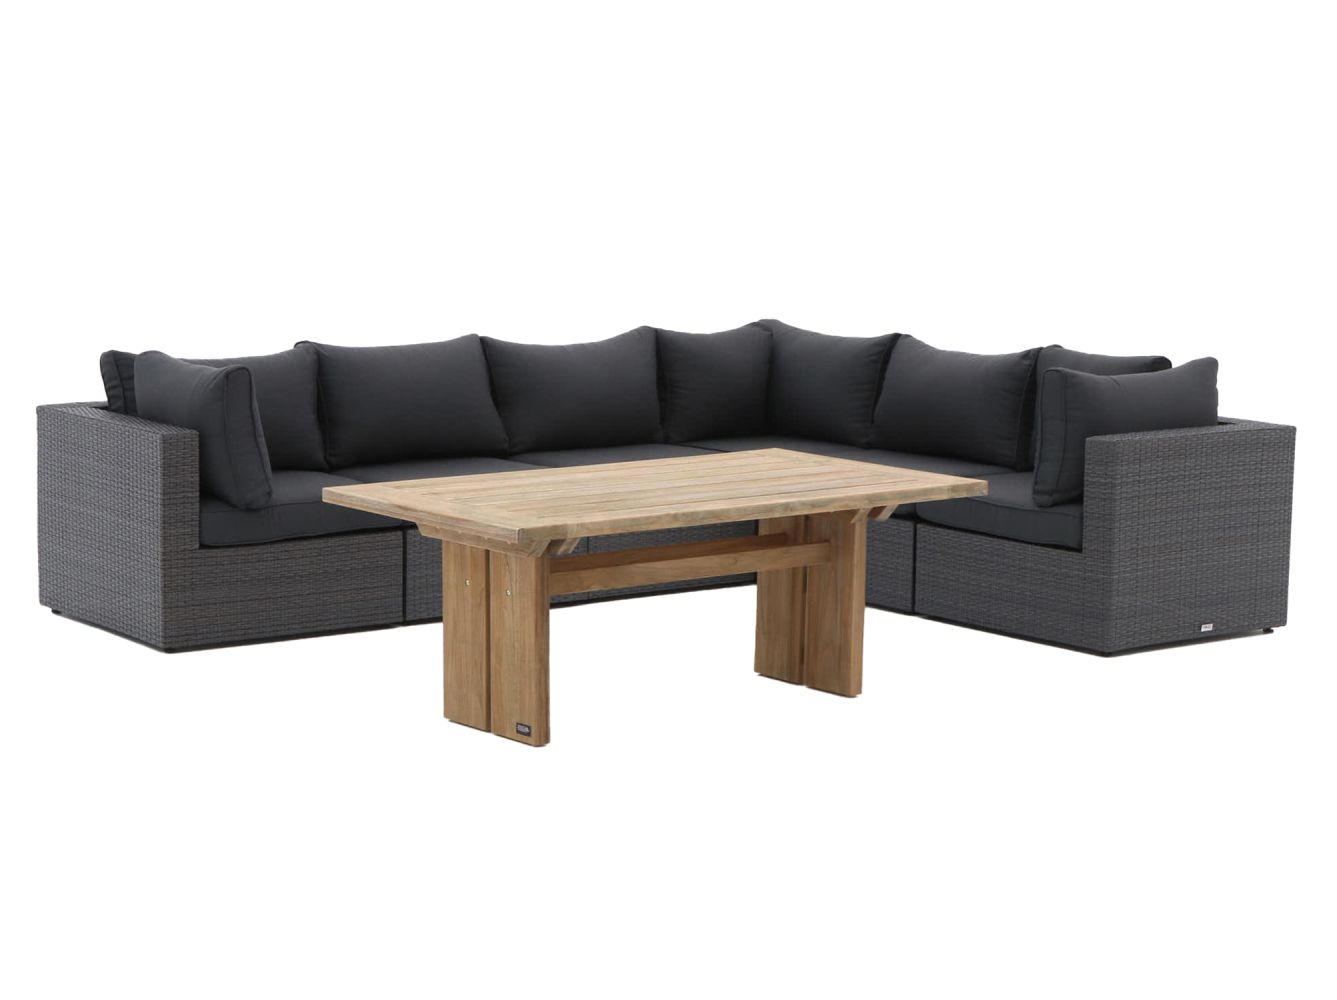 c75a082a92a764893f3049dbbb6c871e8f77bb53 114697 p01 ptlh9rugmmsxsygu - Forza Barolo/ROUGH-L dining loungeset 7-delig